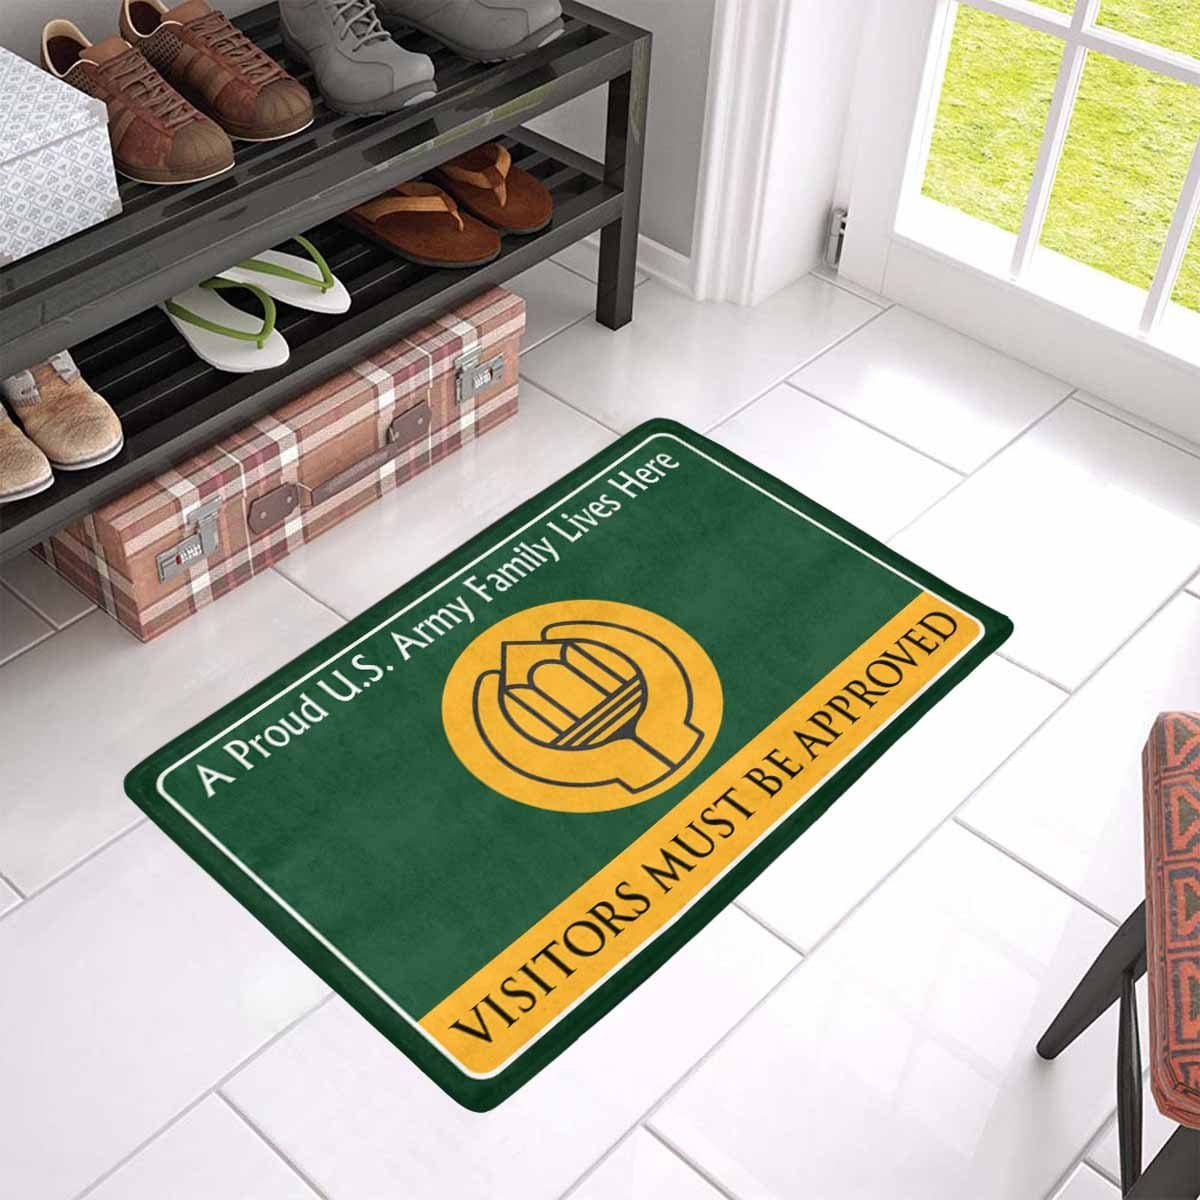 U.S Army Chaplain Assistant Family Doormat - Visitors must be approved (23.6 inches x 15.7 inches)-Doormat-Army-Branch-Veterans Nation